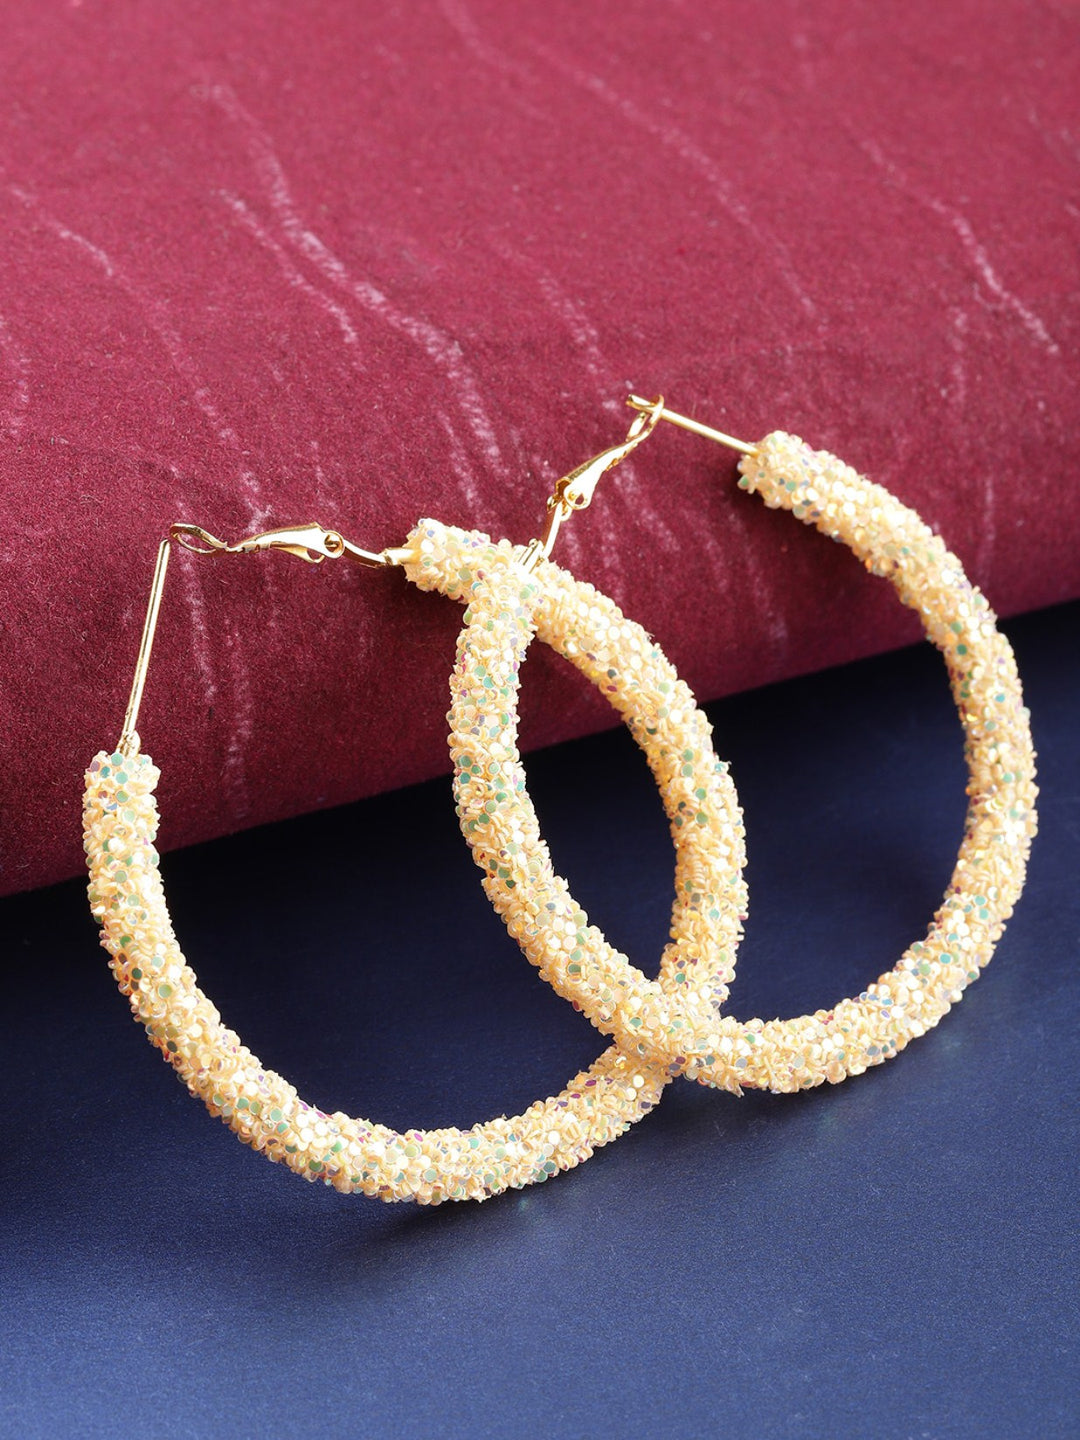 Designer Beige Sparkling Party Wear Stylish Trendy Fashionable Big Hoop Earrings For Women And Girls